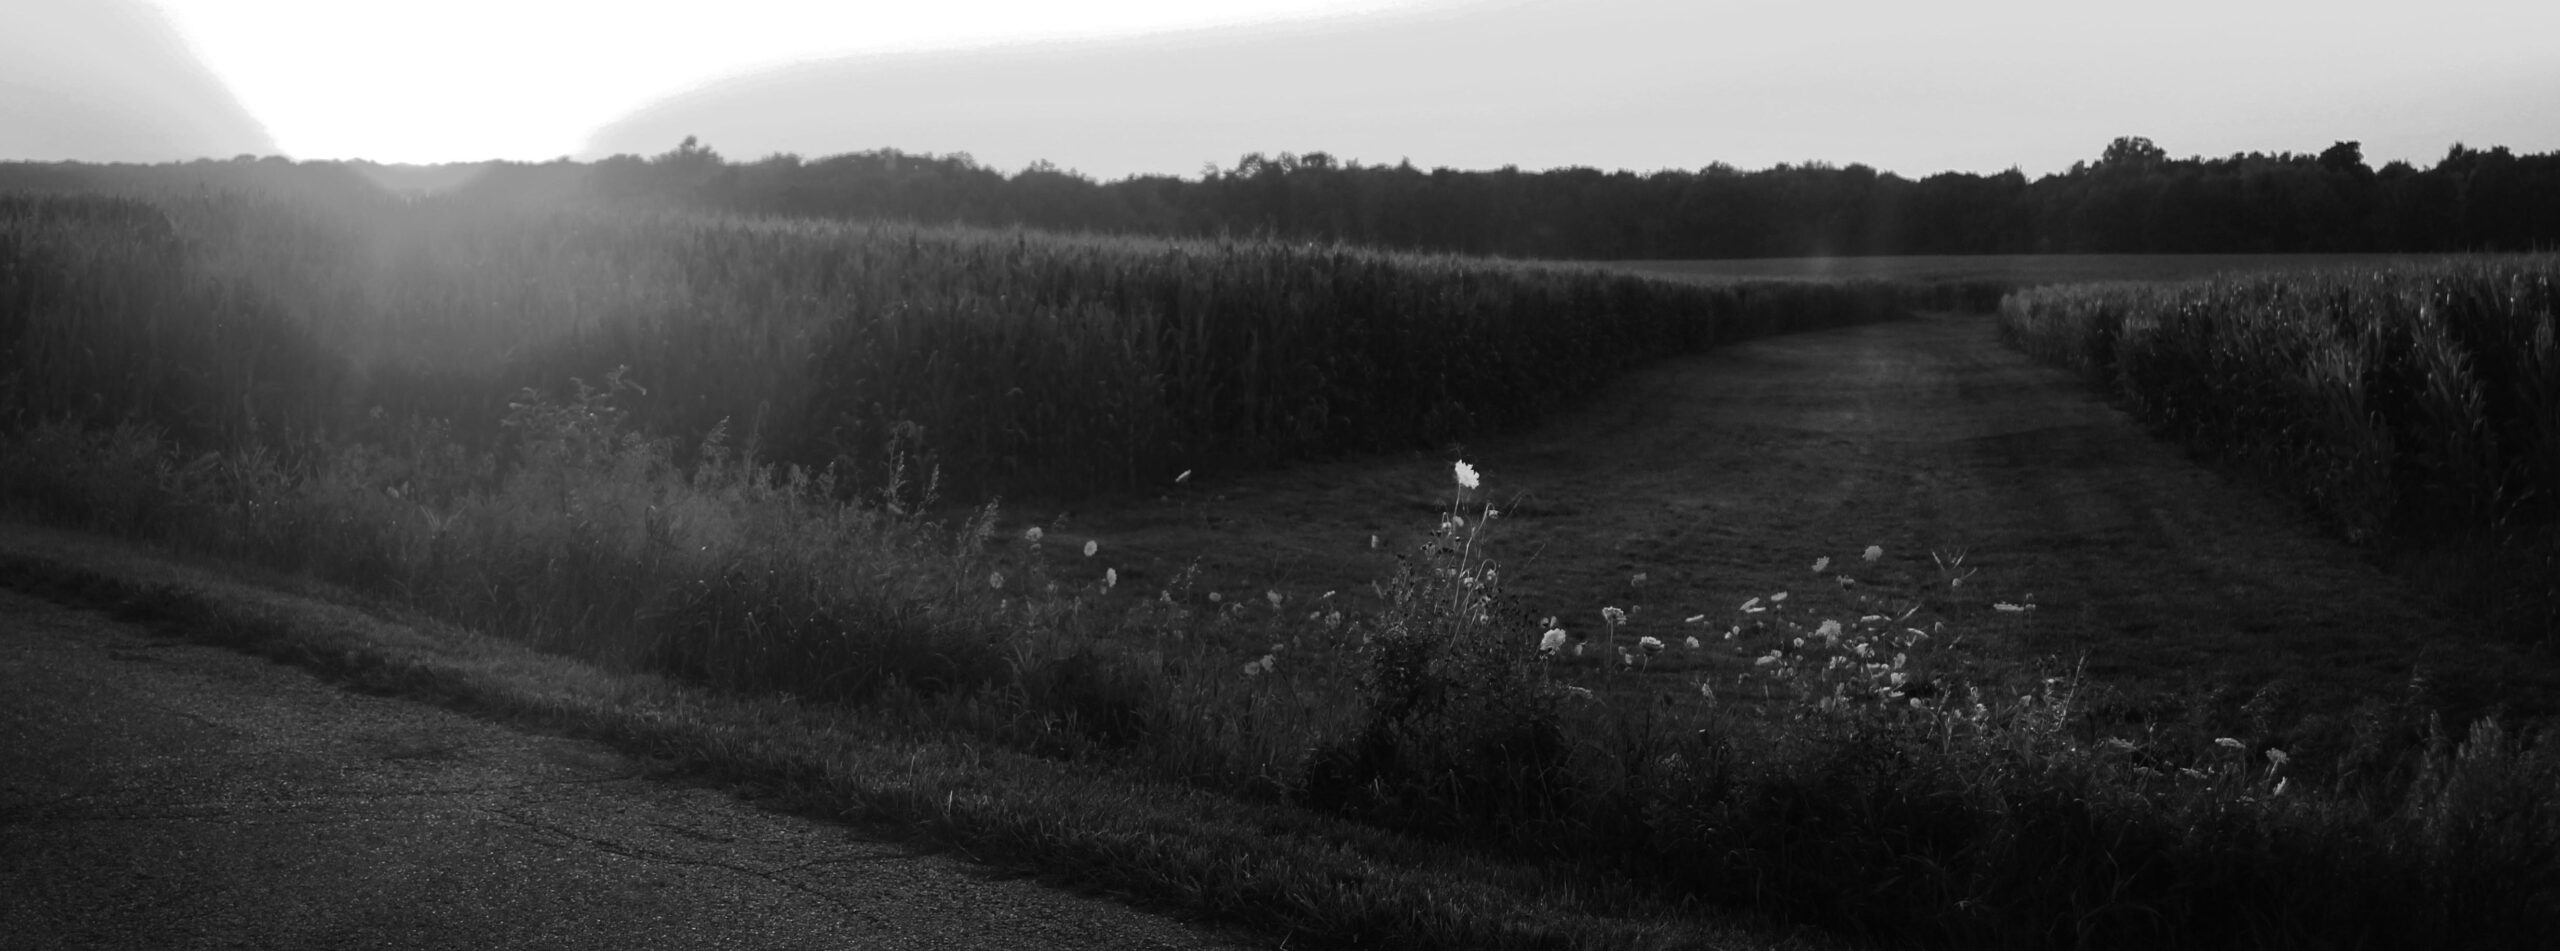 black and white photograph of a corn field in indiana